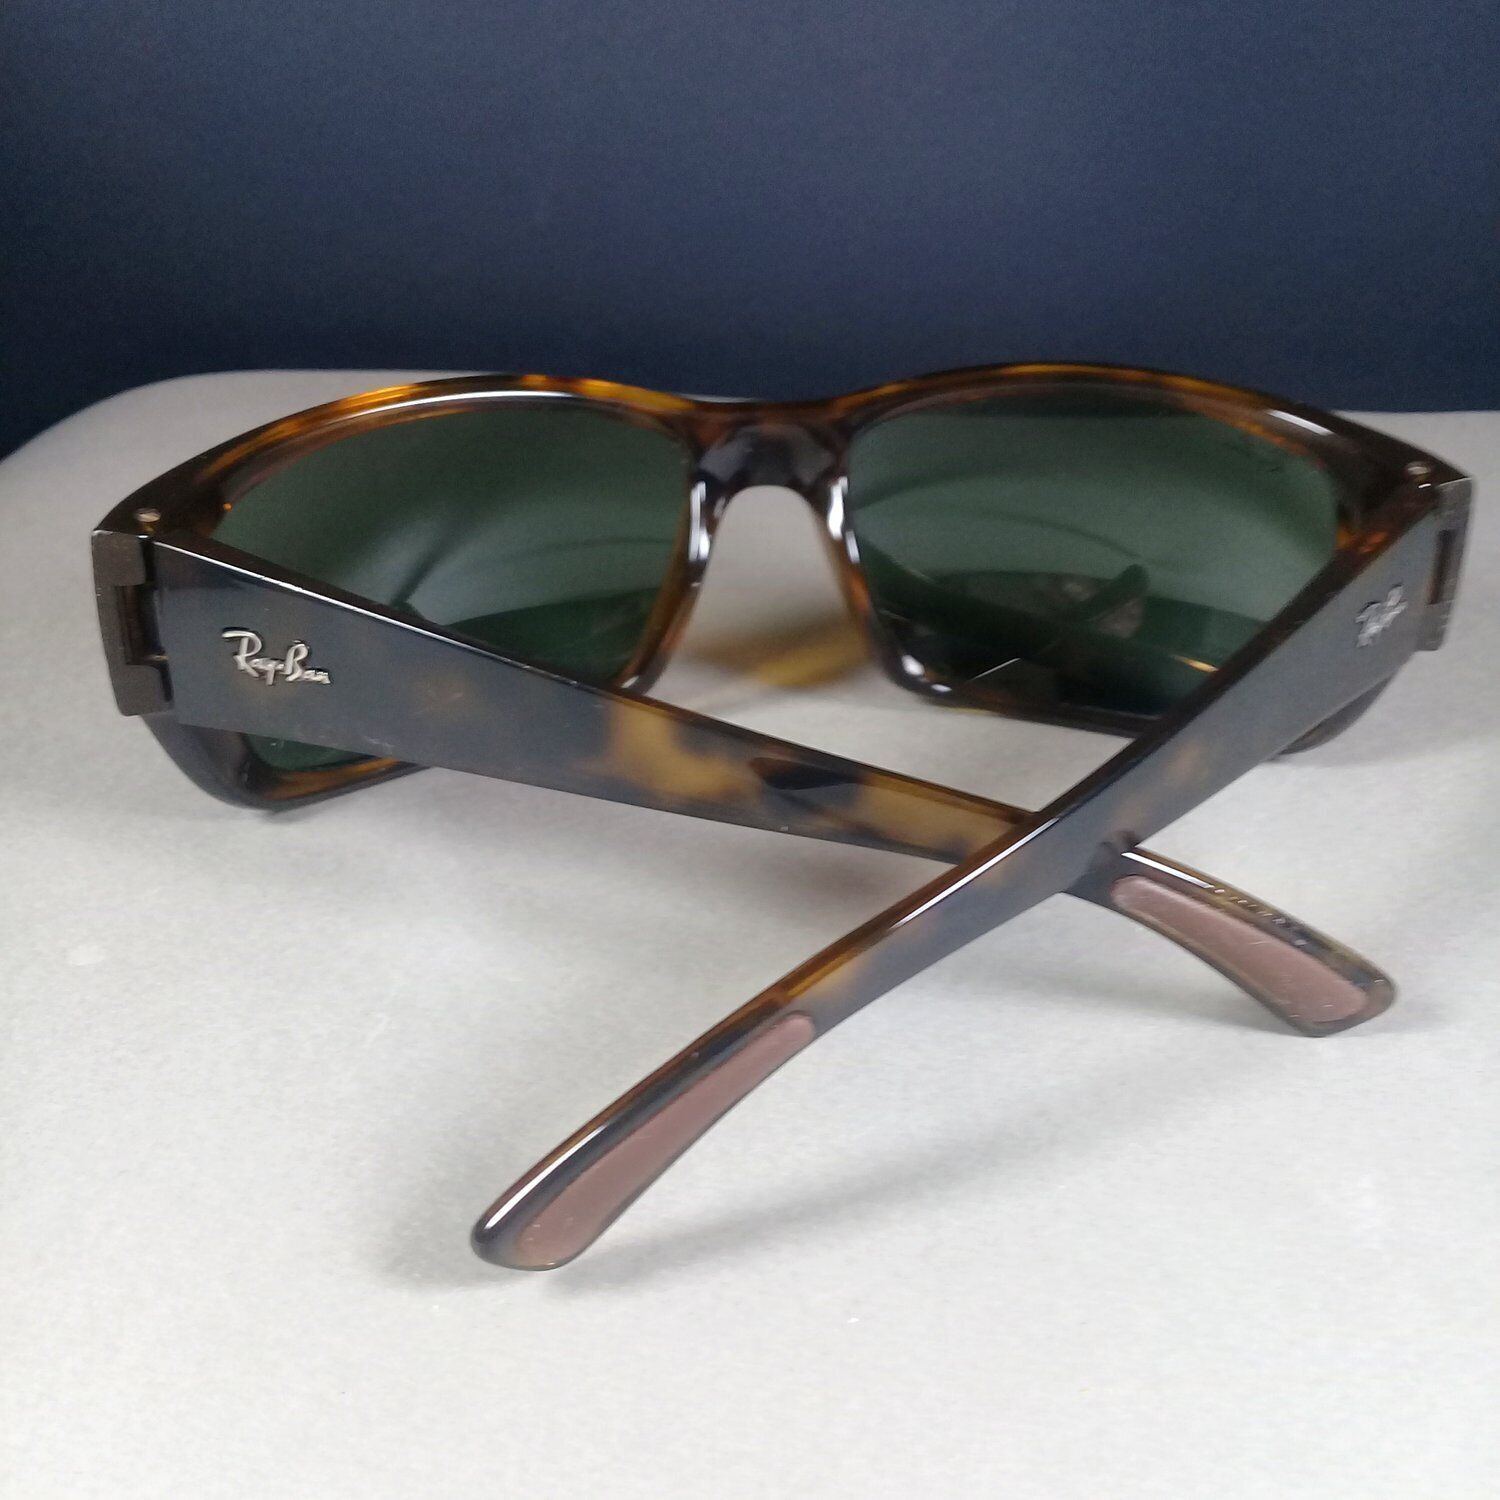 Ray Ban RB 4149 Havana Brown Translucent Wrap Sunglasses In Case ...